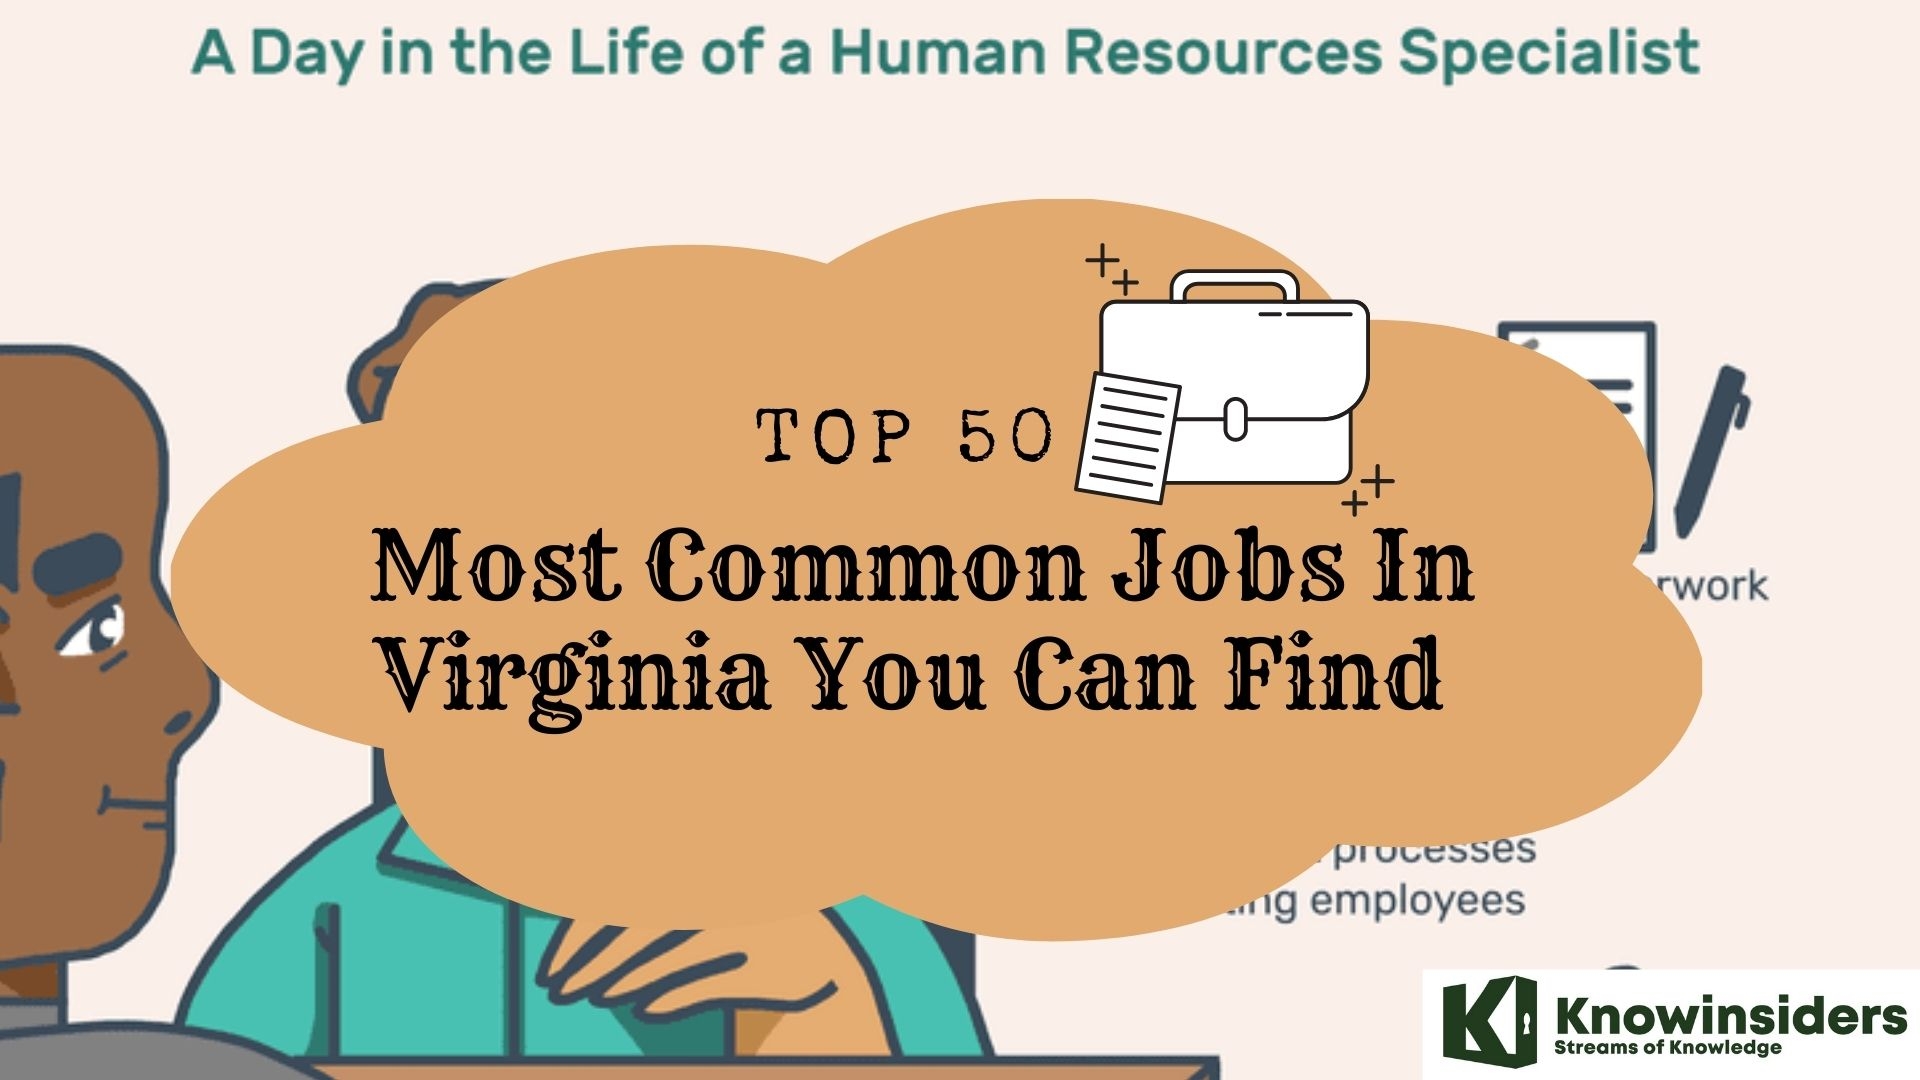 Top 50 Most Common Jobs and Their Wages In Virginia